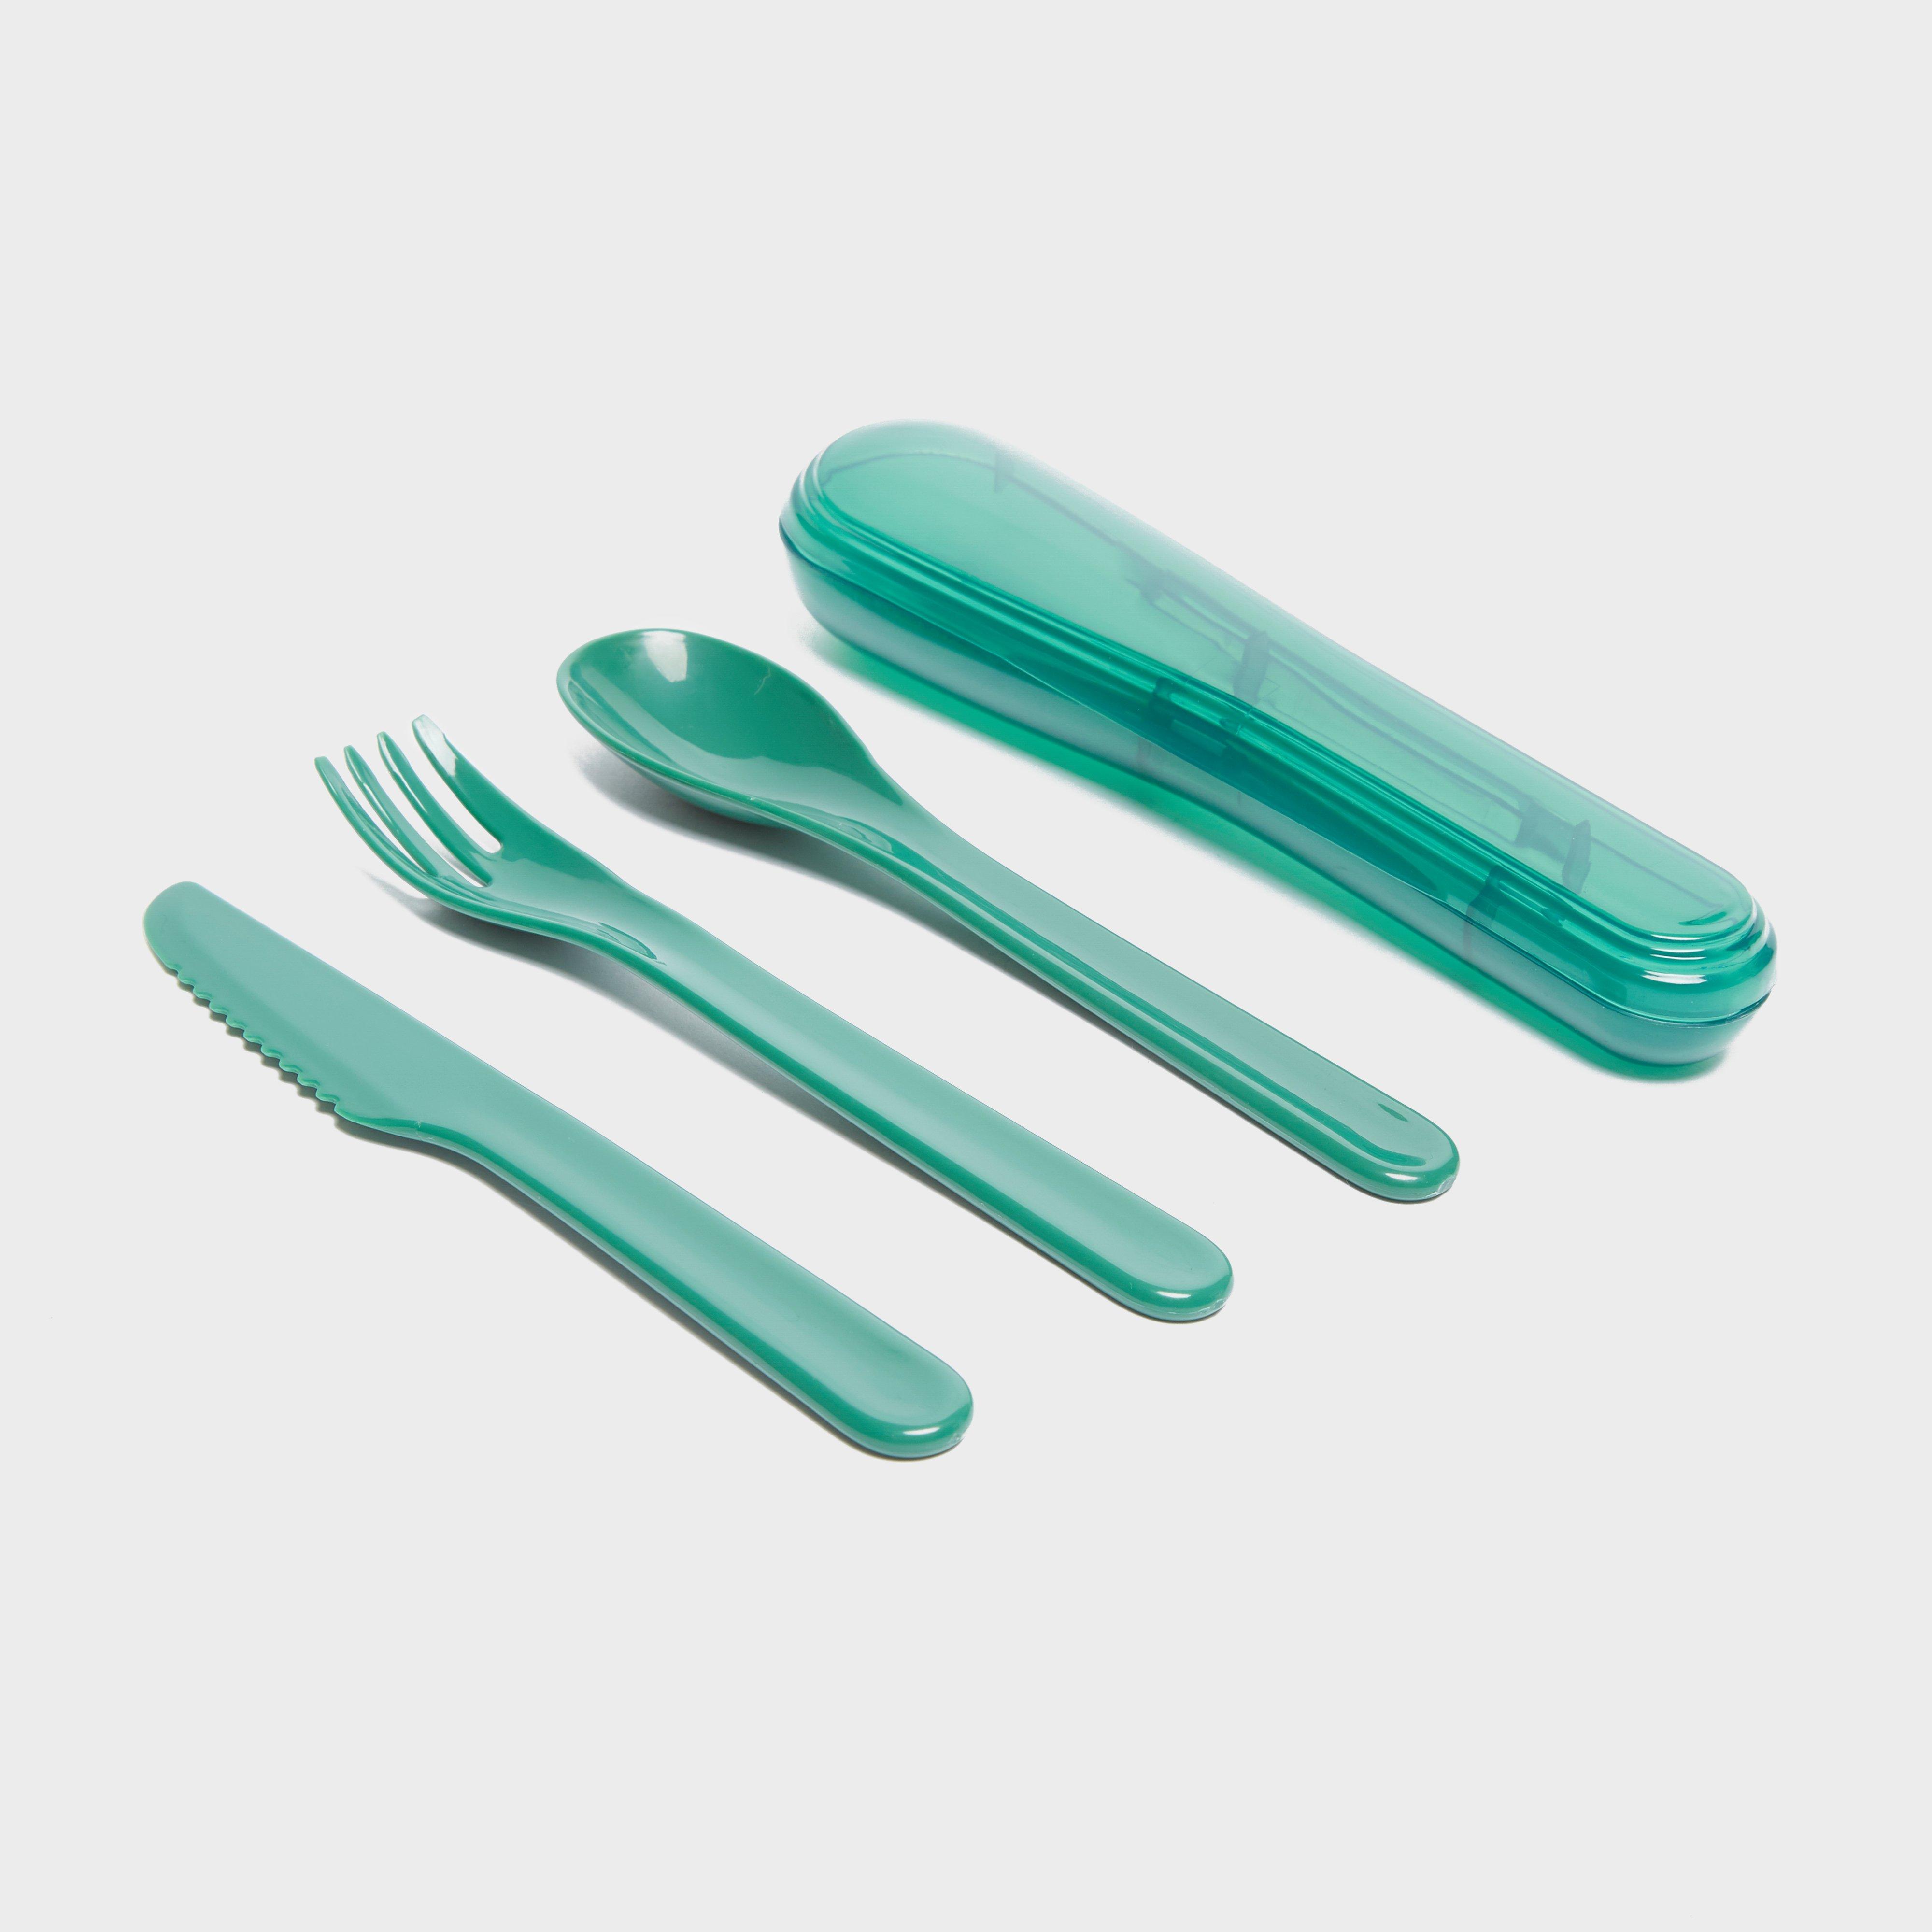 Photos - Other Camping Utensils Hi-Gear Cutlery To Go, Green 